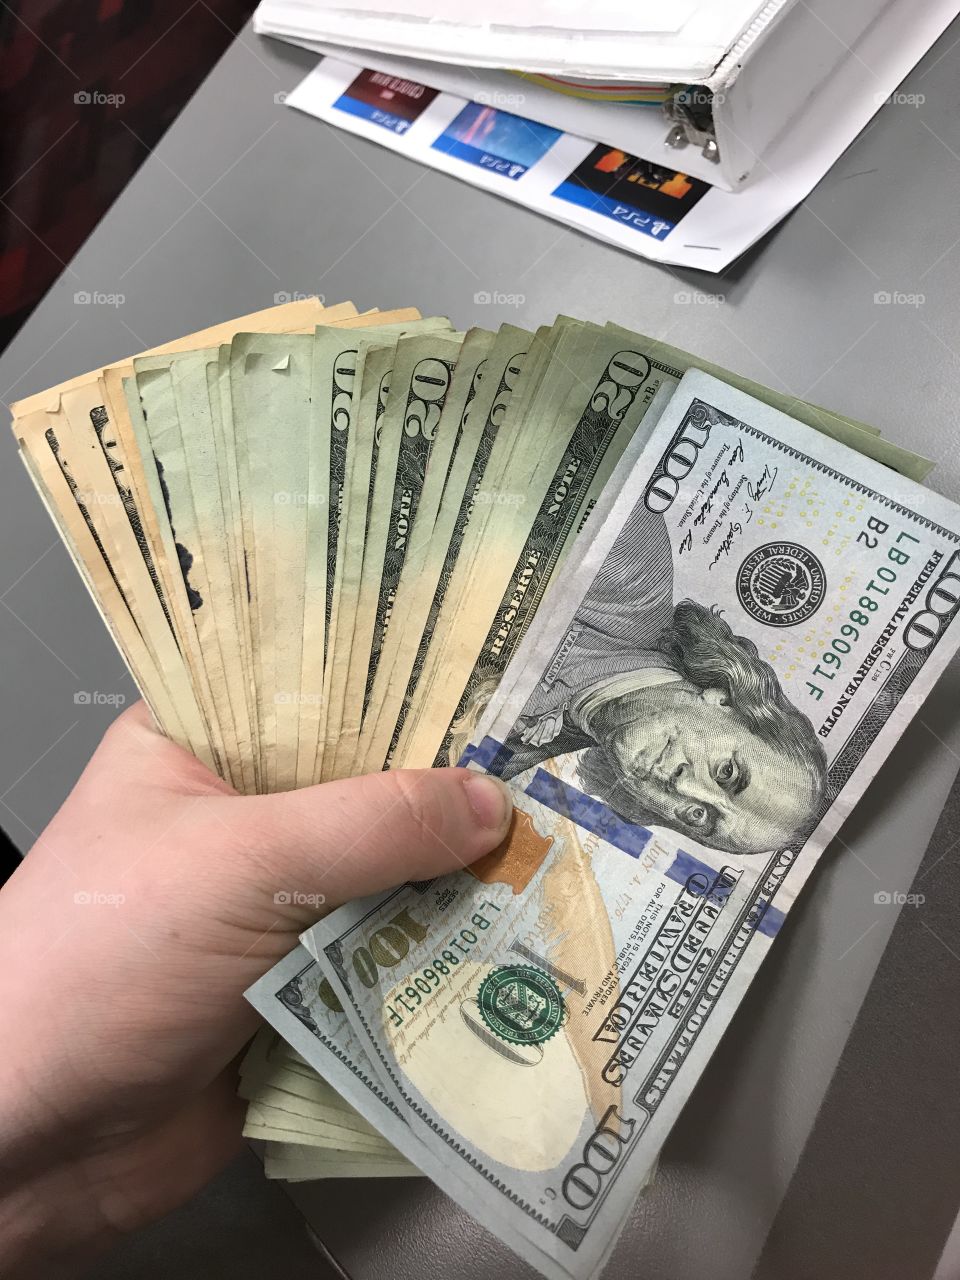 A handful of heavy money! Nothing makes you feel richer than a thick stack of cash.